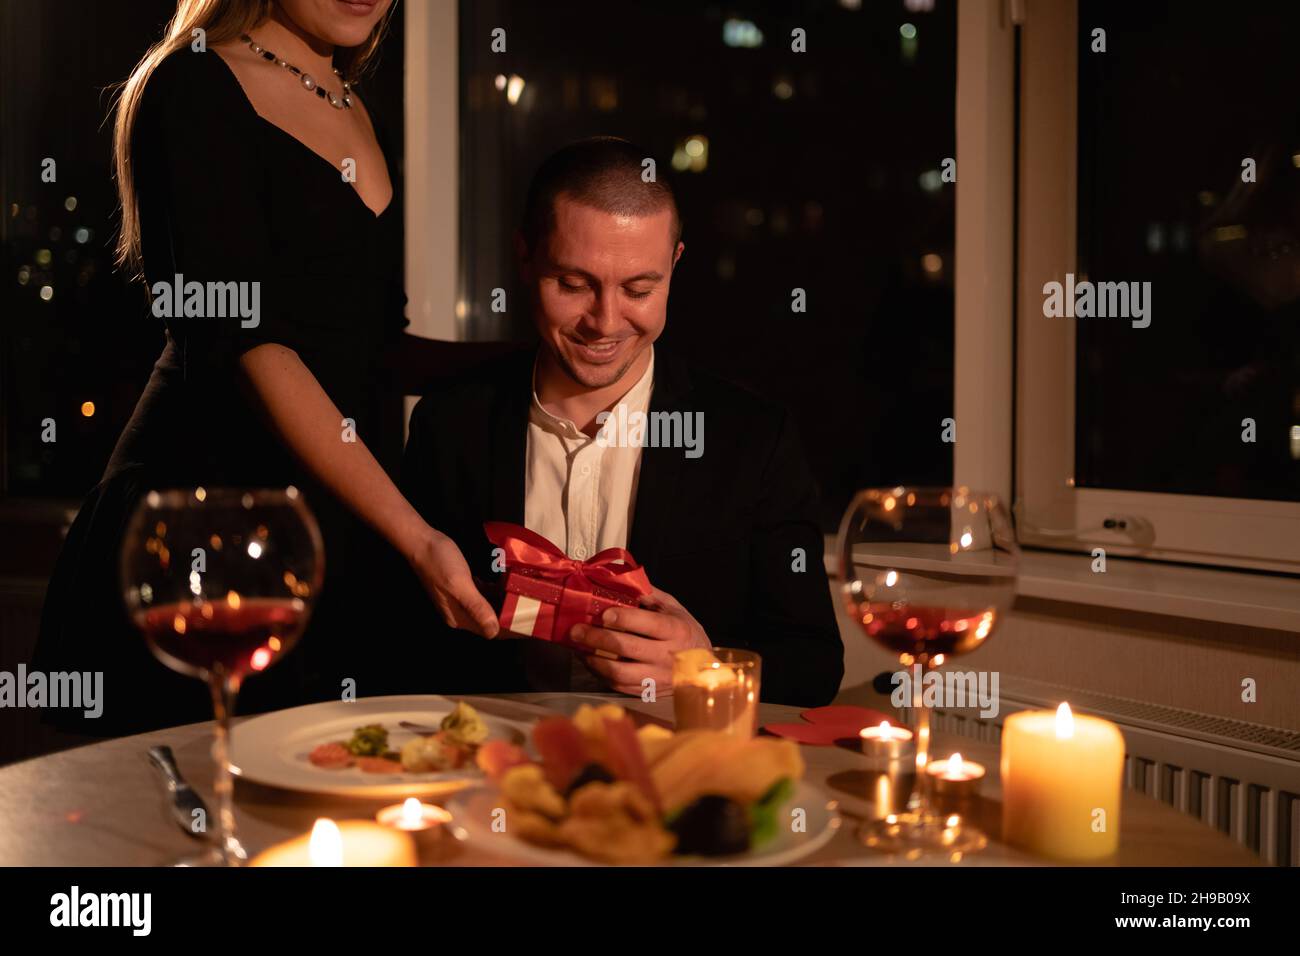 Night date on Valentine's Day, a girl giving a gift to a man dinner with candles, dinner for two, a box with a surprise gift. valentine's celebration Stock Photo